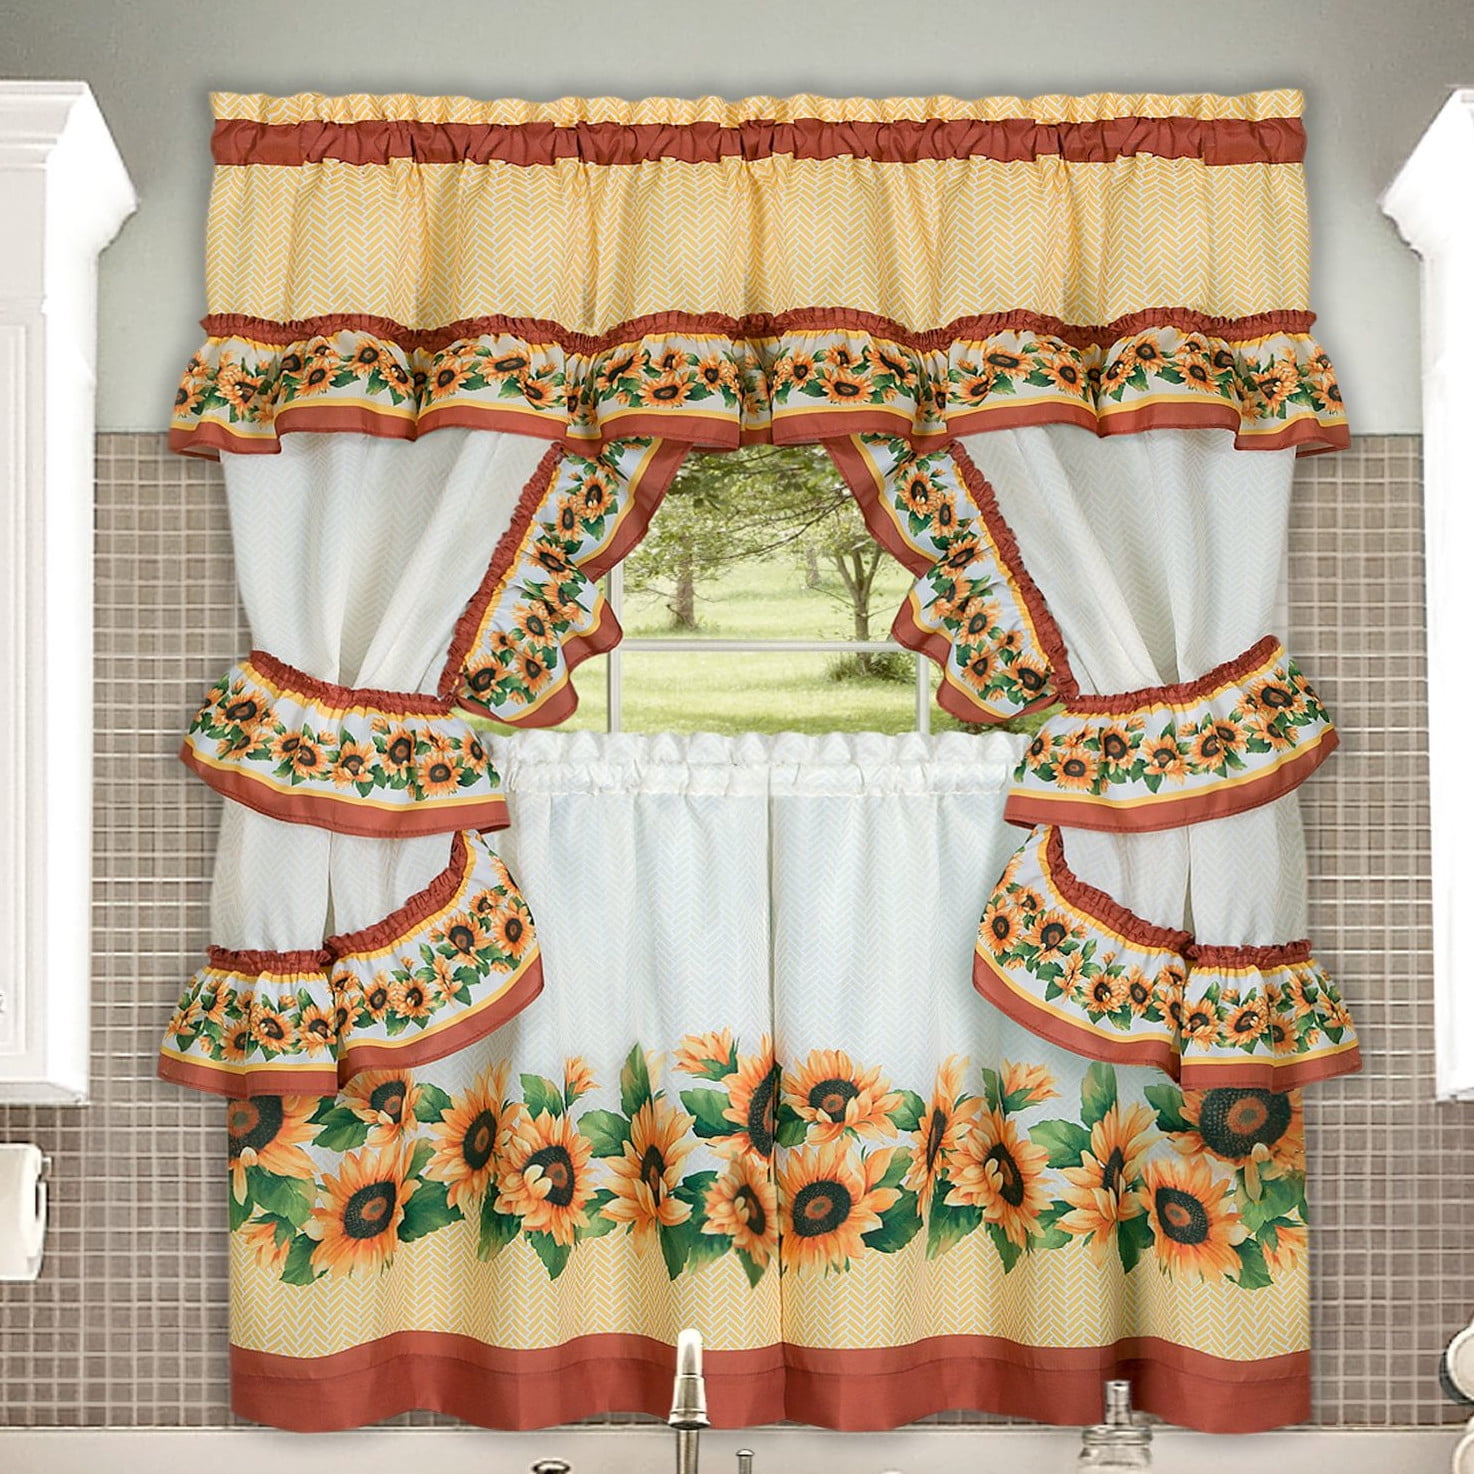 Top Swag and Tiebacks Complete Window Kitchen Curtain Set with Tier Panels 